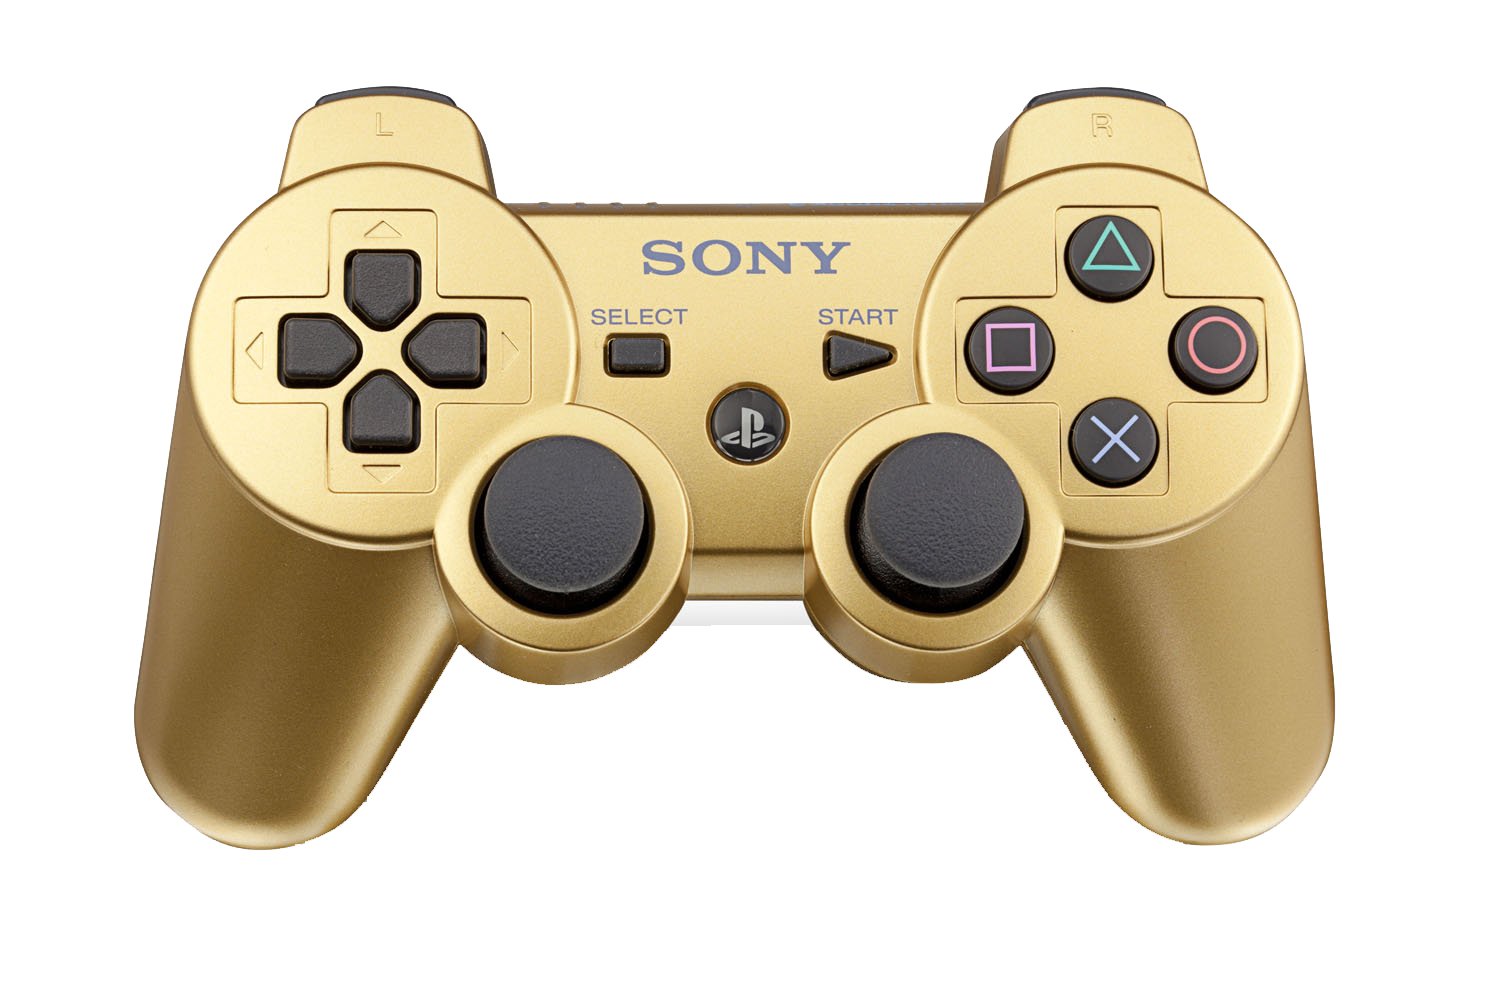 Sony PS3 - DualShock 3 Wireless Controller - Gold